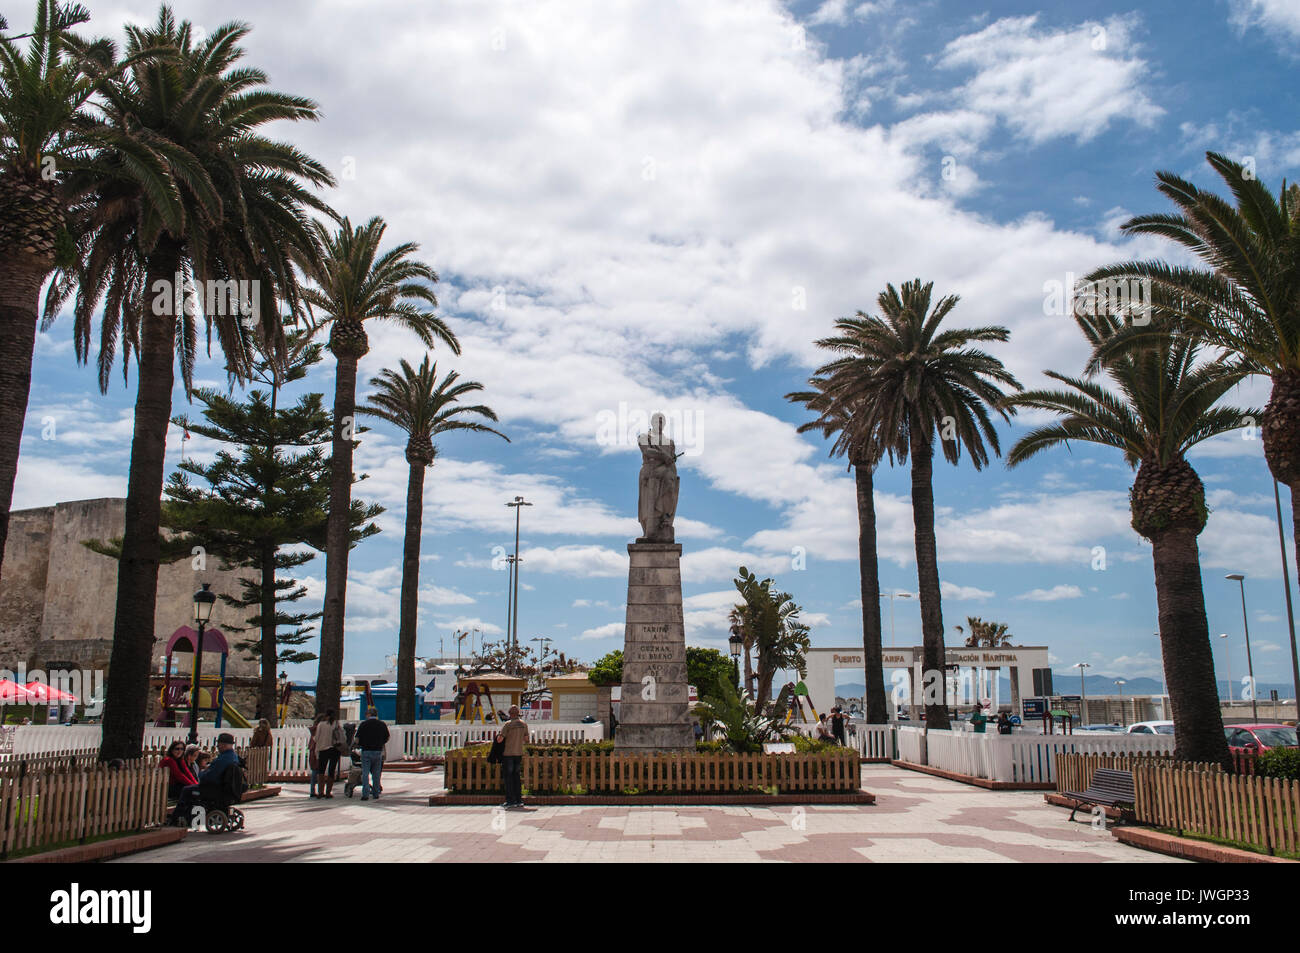 clouds, palm trees and the statue of Guzman El Bueno, Spanish nobleman and hero of Spain during the medieval period in the town of Tarifa Stock Photo